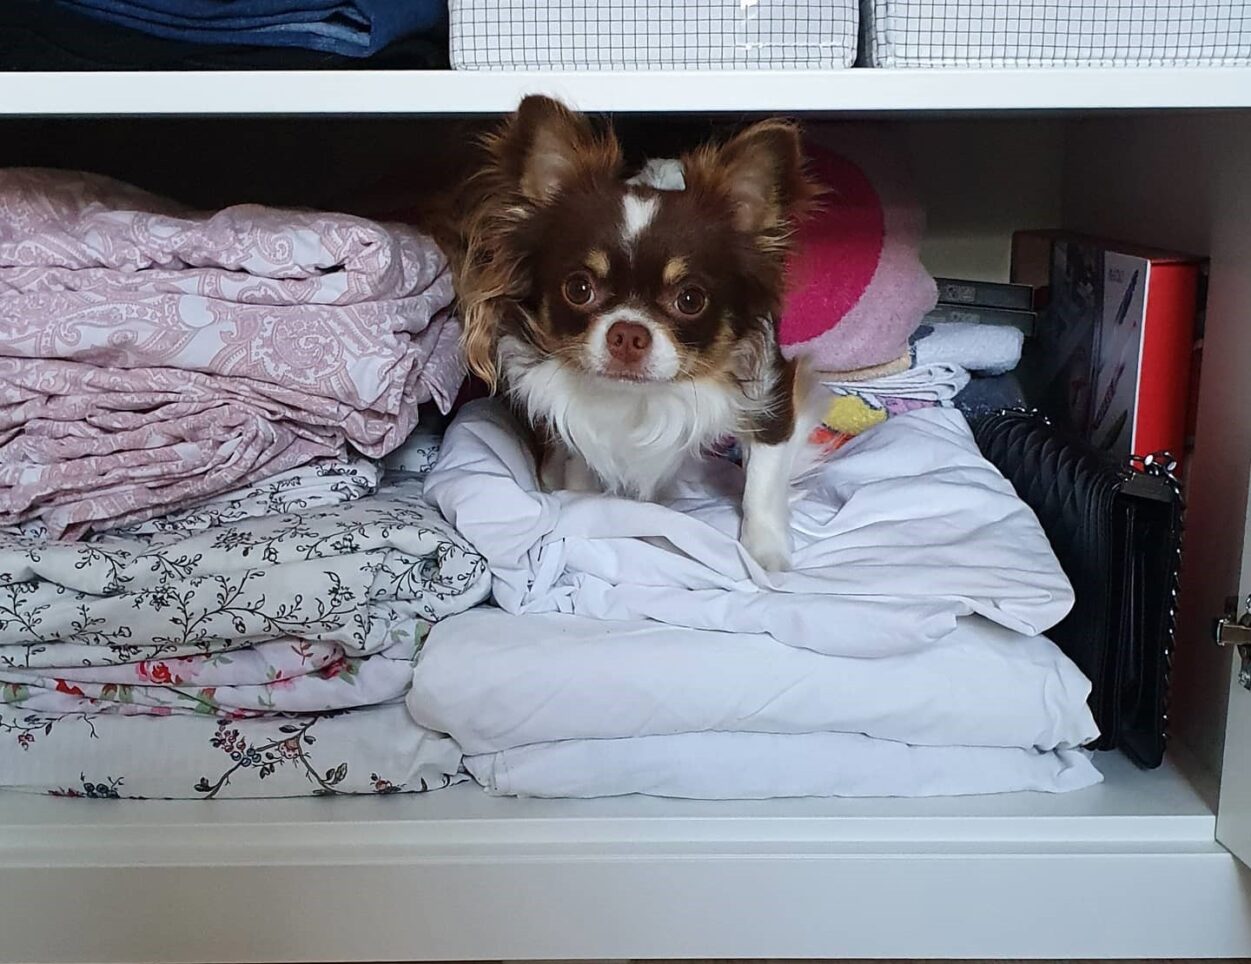 here are some clever dog closet room ideas that will not only help you maximize storage and organization in your furry friend's space